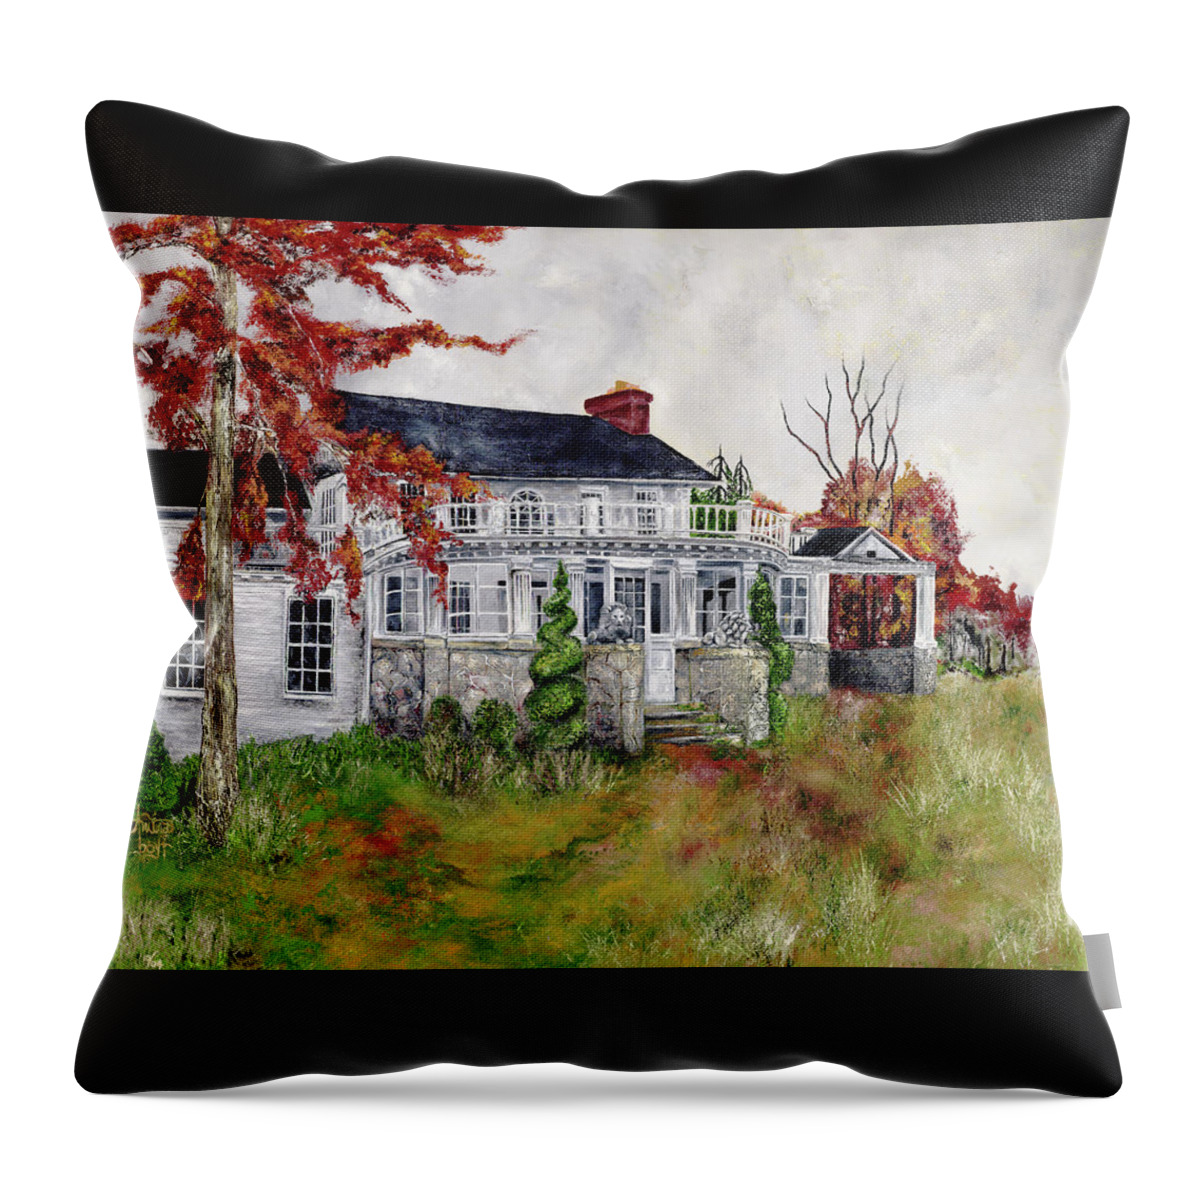 Historical Architecture Throw Pillow featuring the painting The Inhabitants by Anitra Boyt